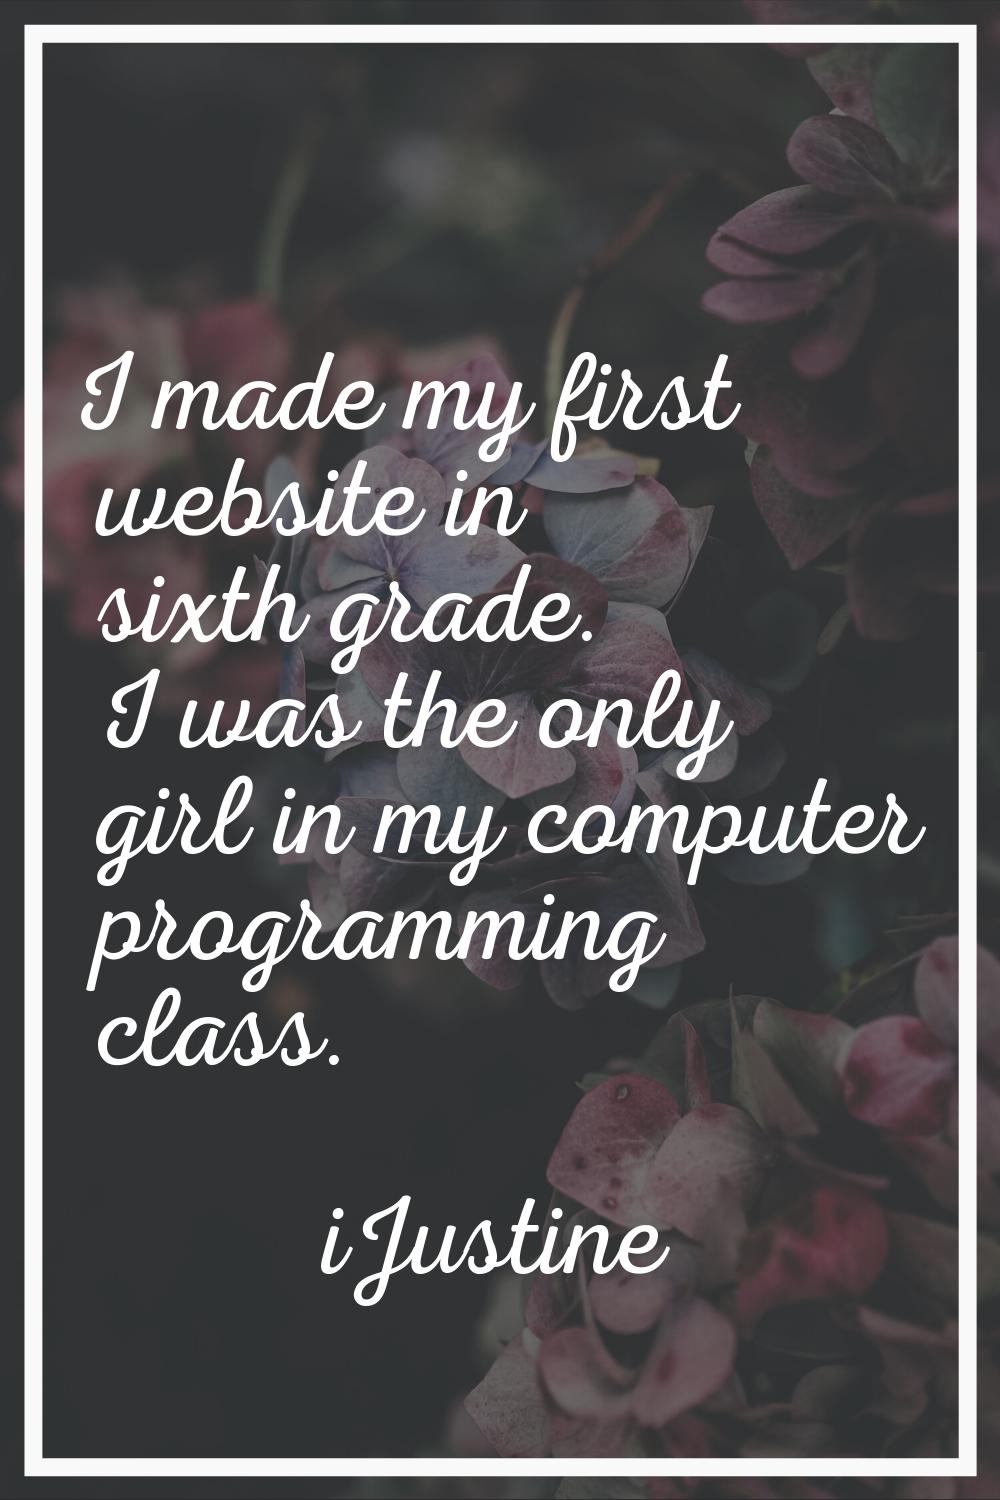 I made my first website in sixth grade. I was the only girl in my computer programming class.